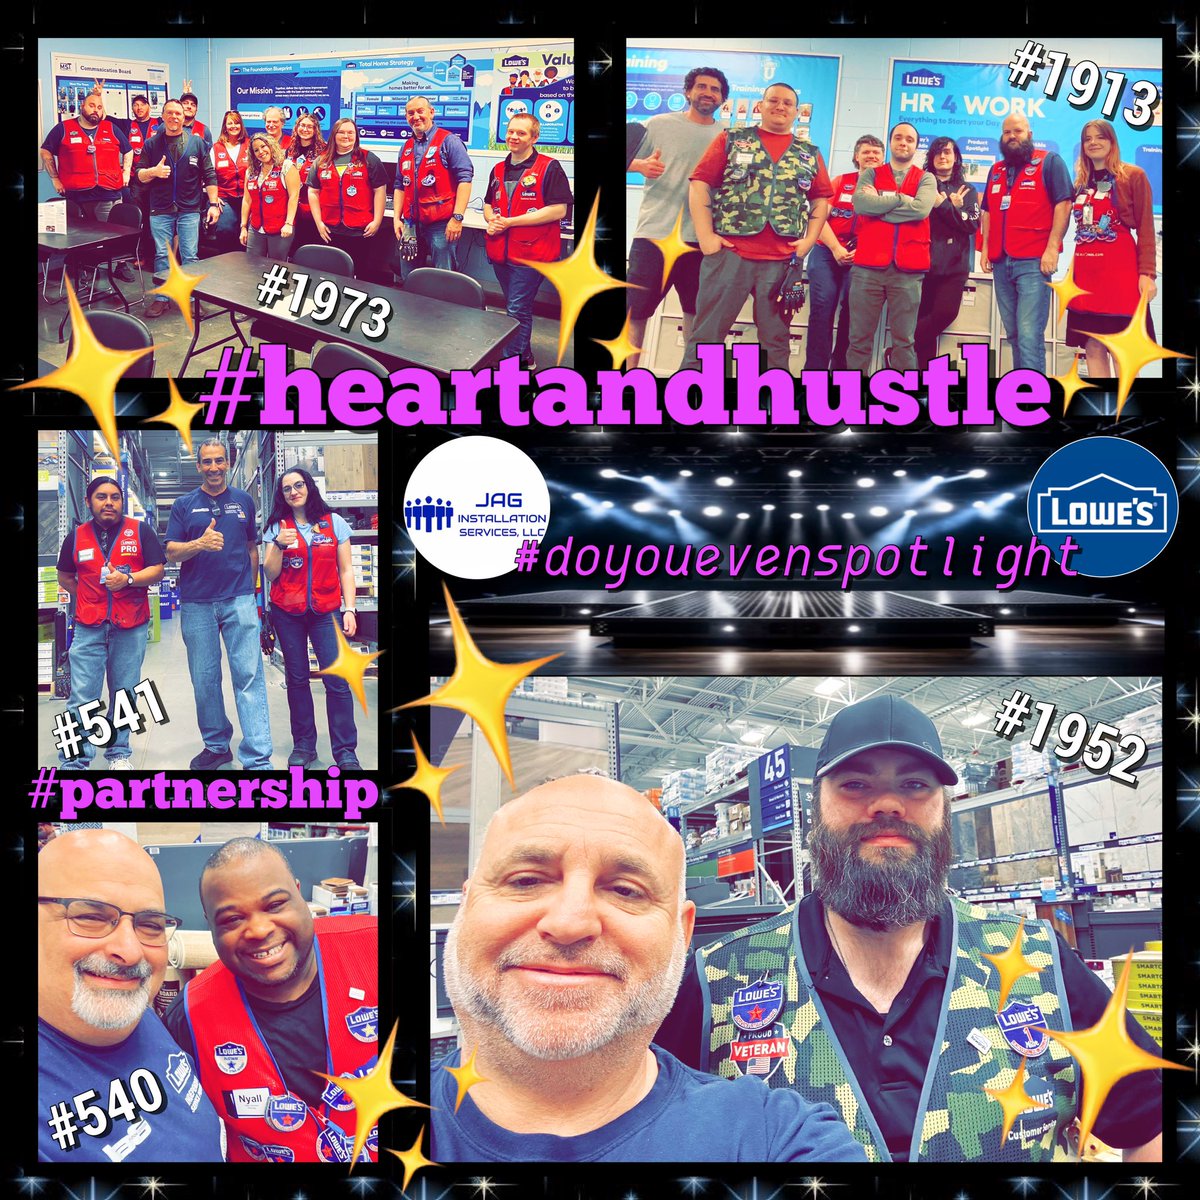 “The star player must slay his ego & learn teamwork & communication skills b4 he can achieve the ultimate in sport”#walterfrazier

JAG’s stars walk the red carpet at #Lowes #specialtyspotlight in #region18! #BuildingConfidence creates a stage for #teamwork & open #communication.